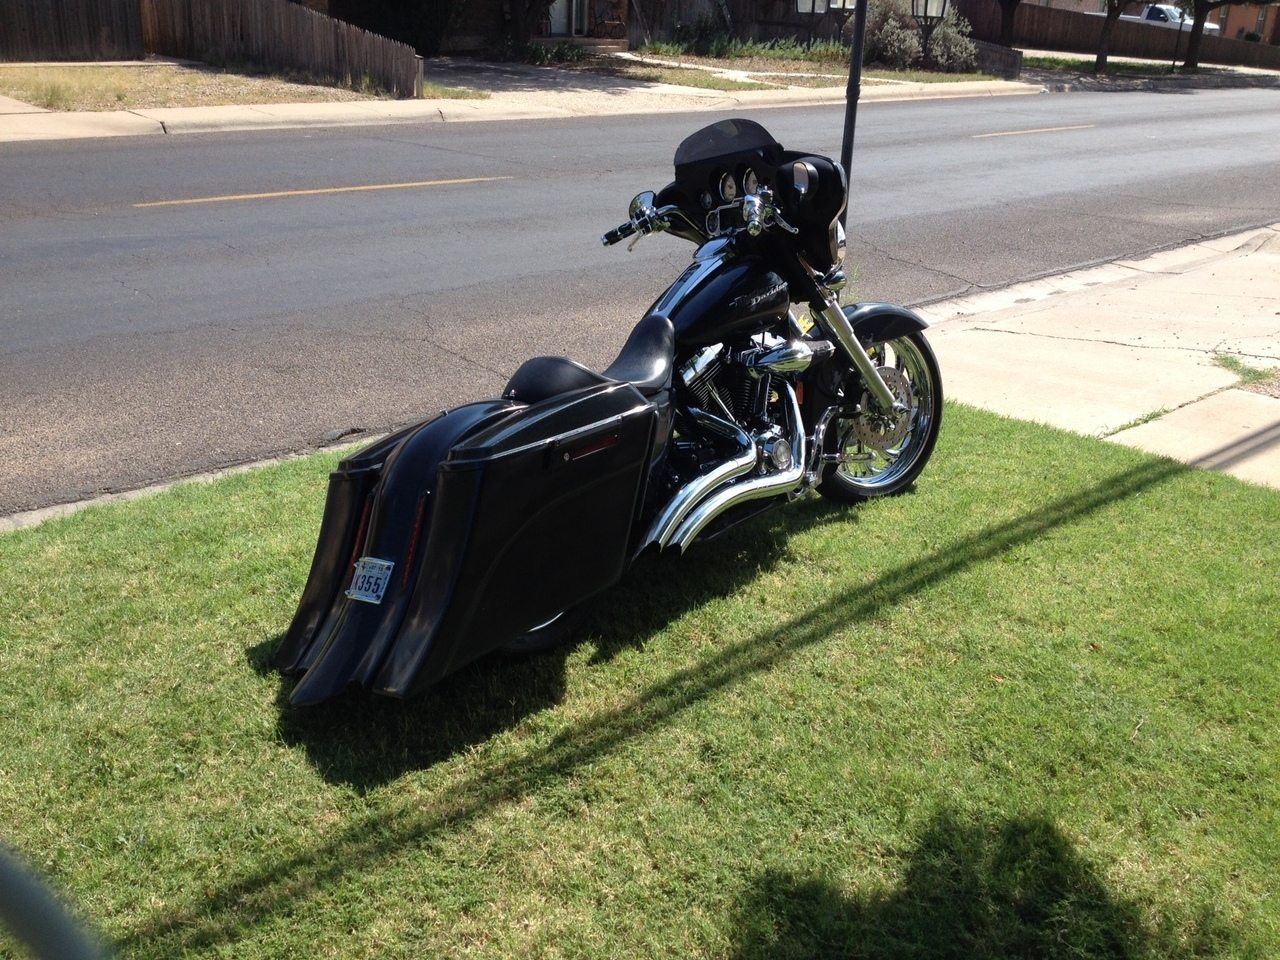 Amazon 5 inch Extended Saddle Bags 2014 Street Glide  YouTube